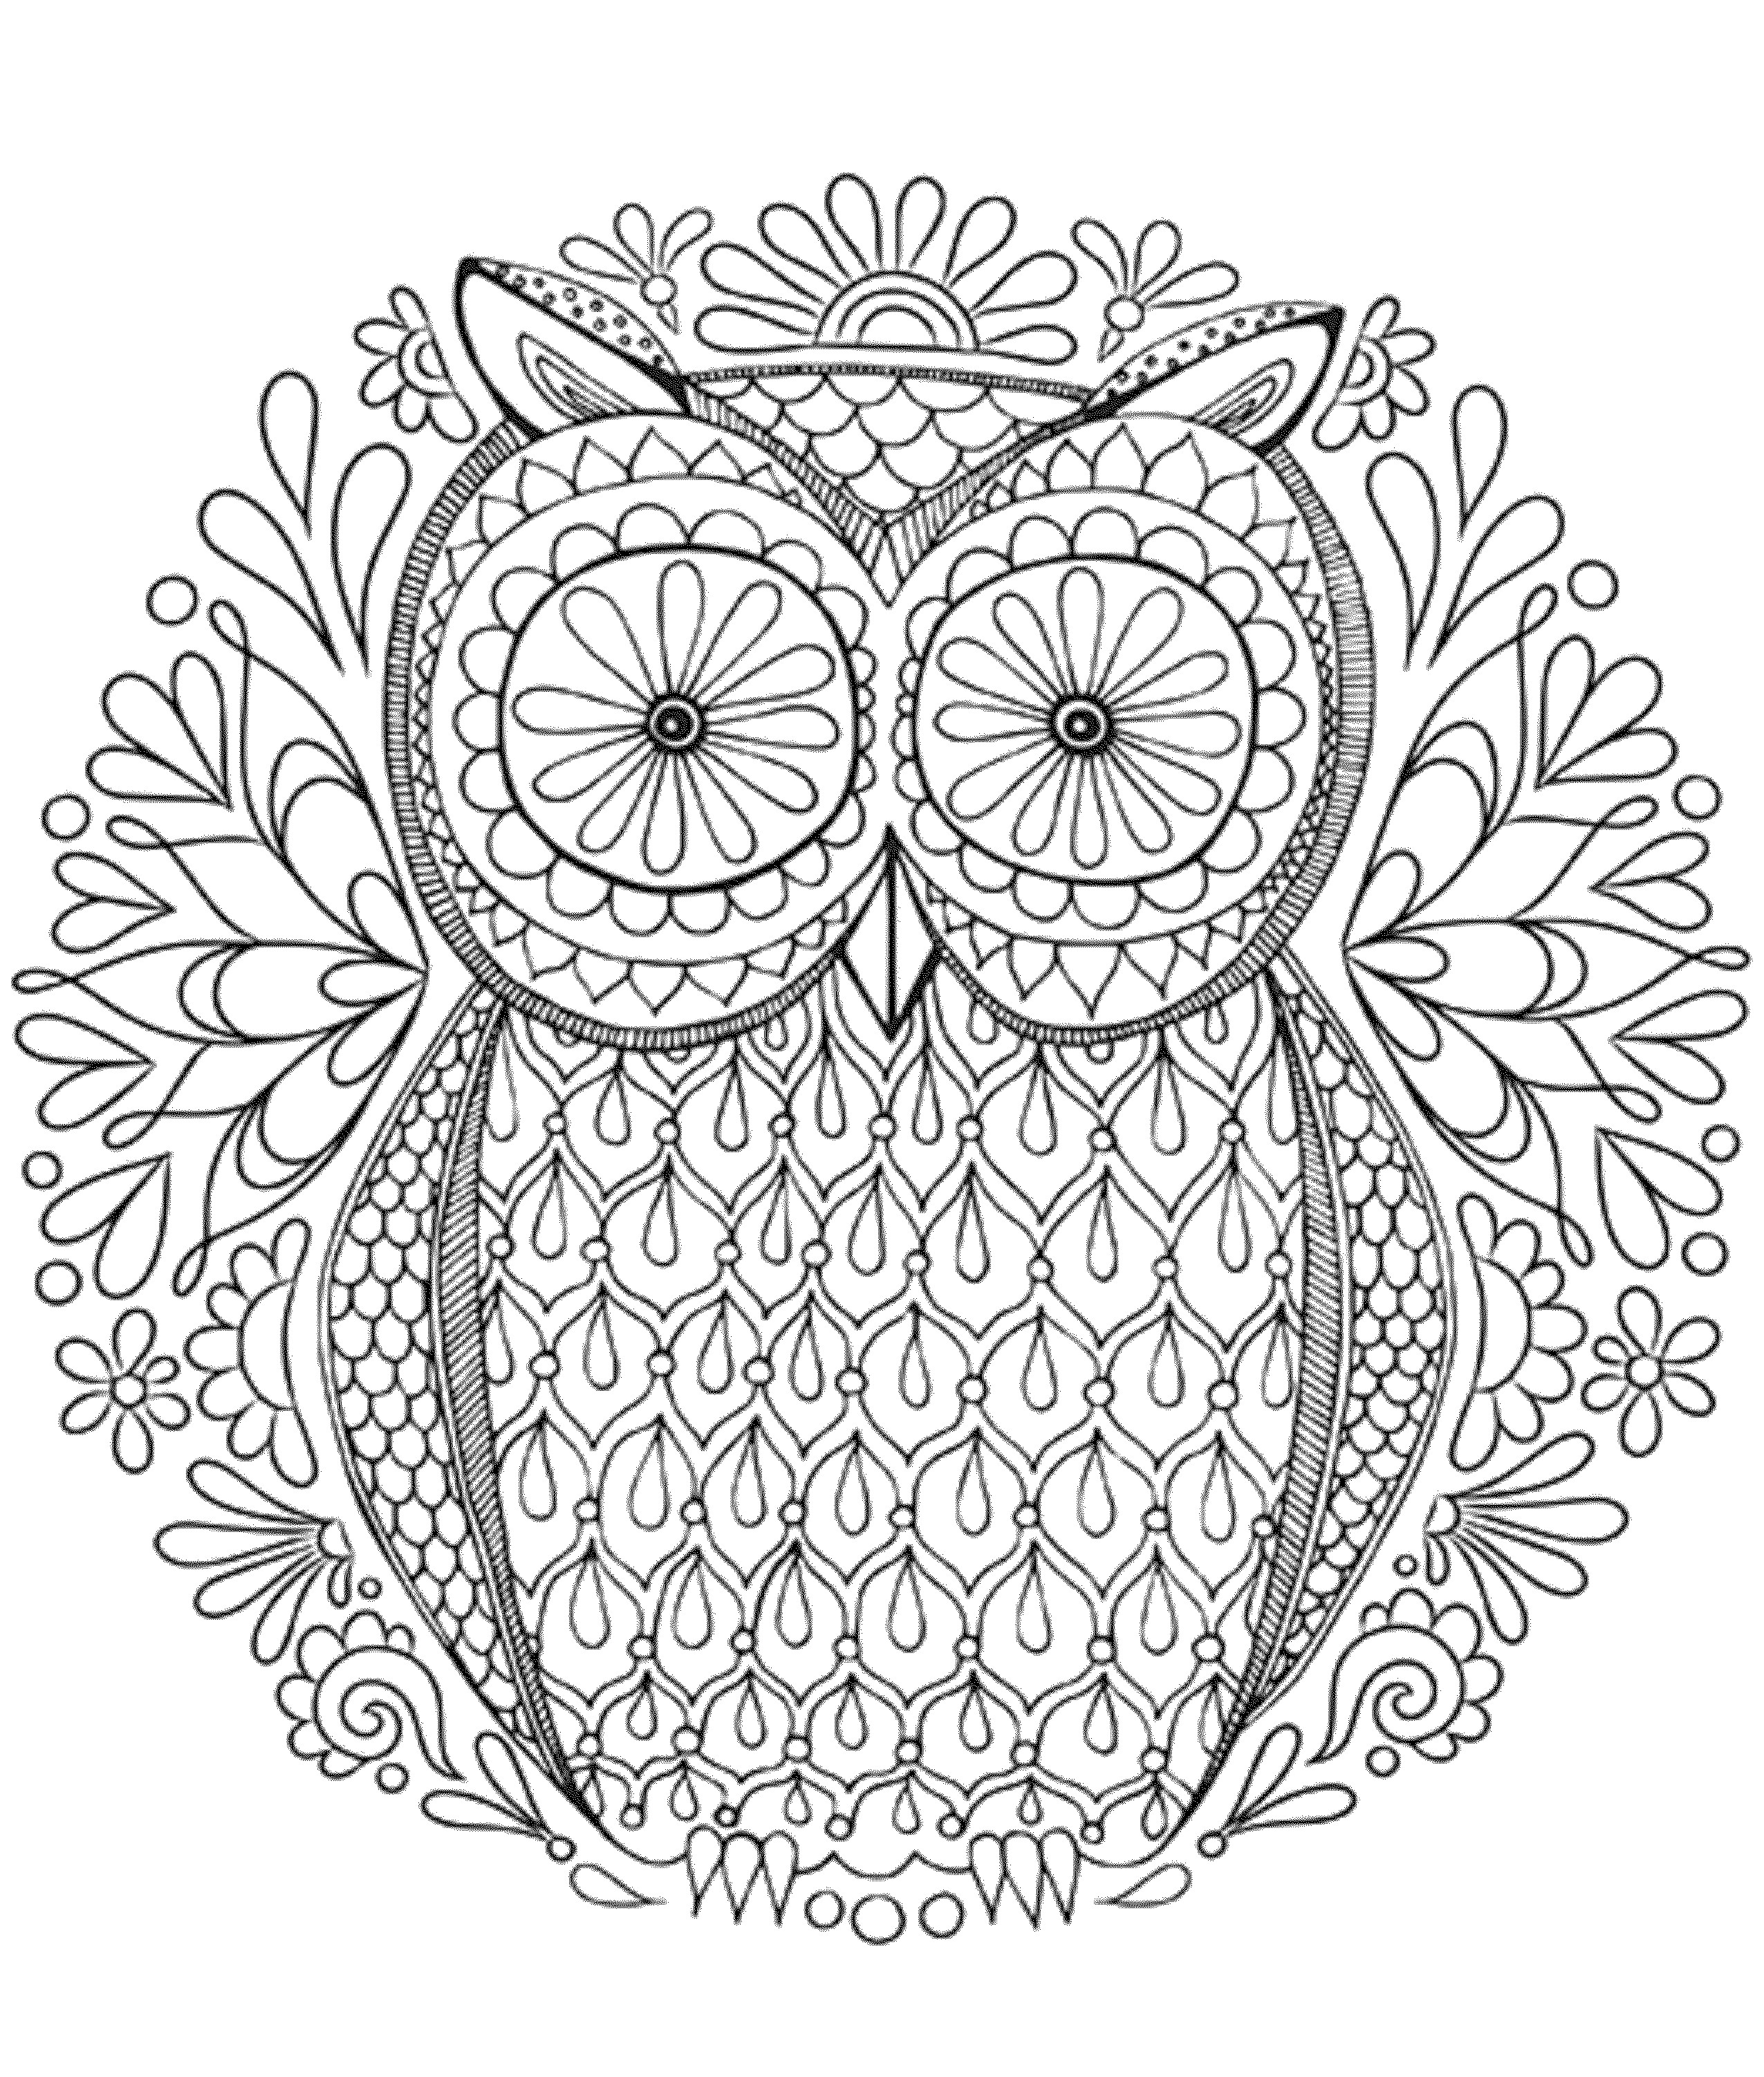 Free Printable Coloring Pages For Adults
 Hard Coloring Pages for Adults Best Coloring Pages For Kids